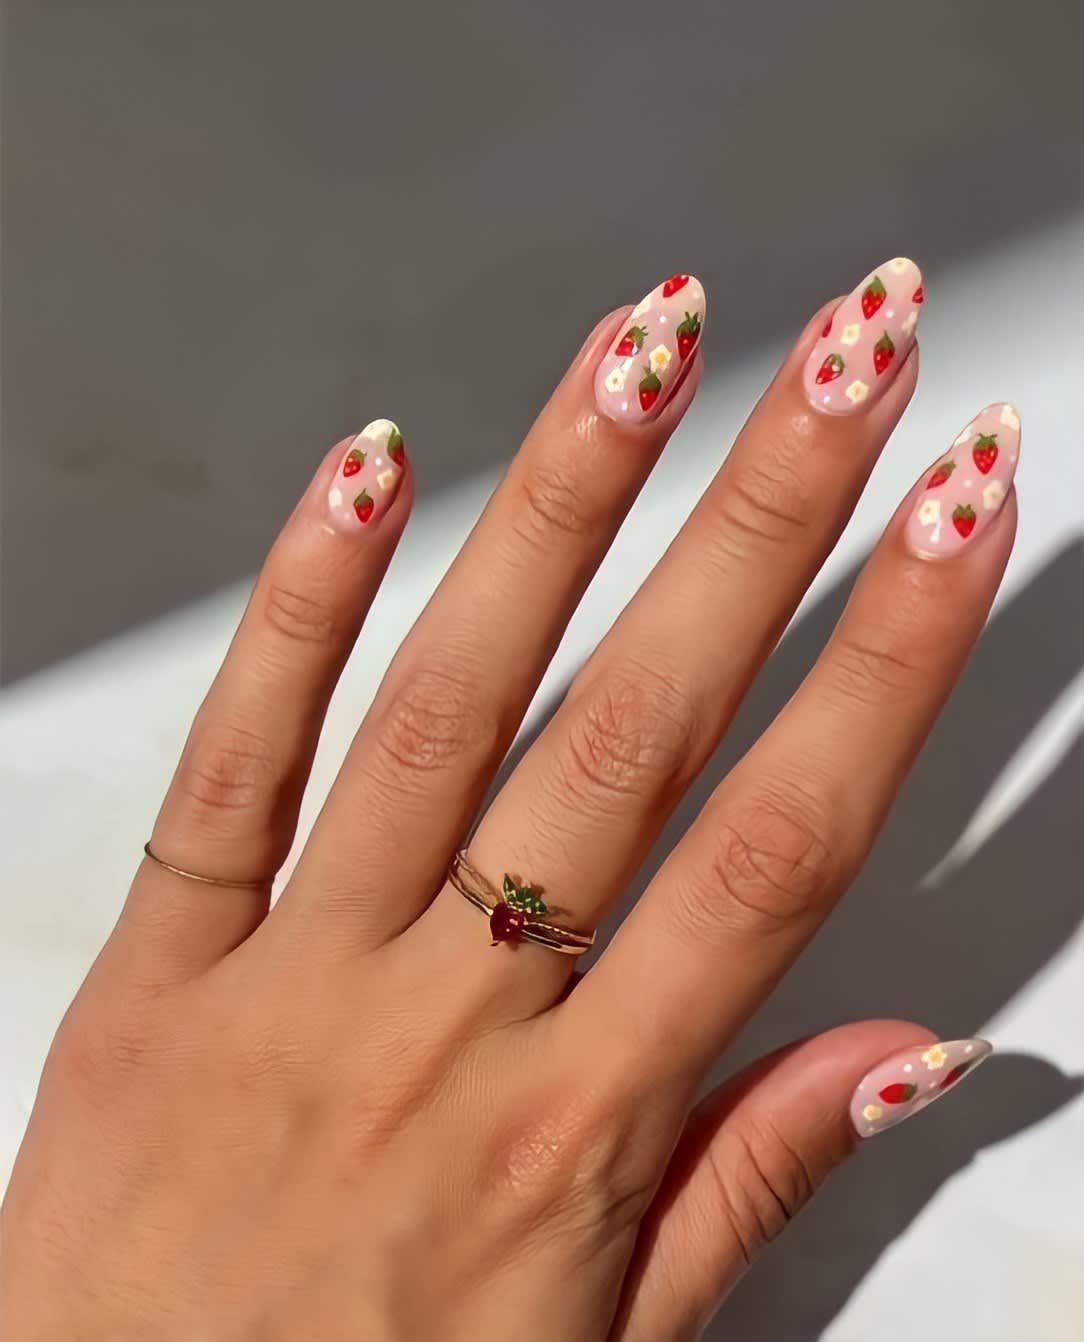 Hand with strawberry and daisy painted nails